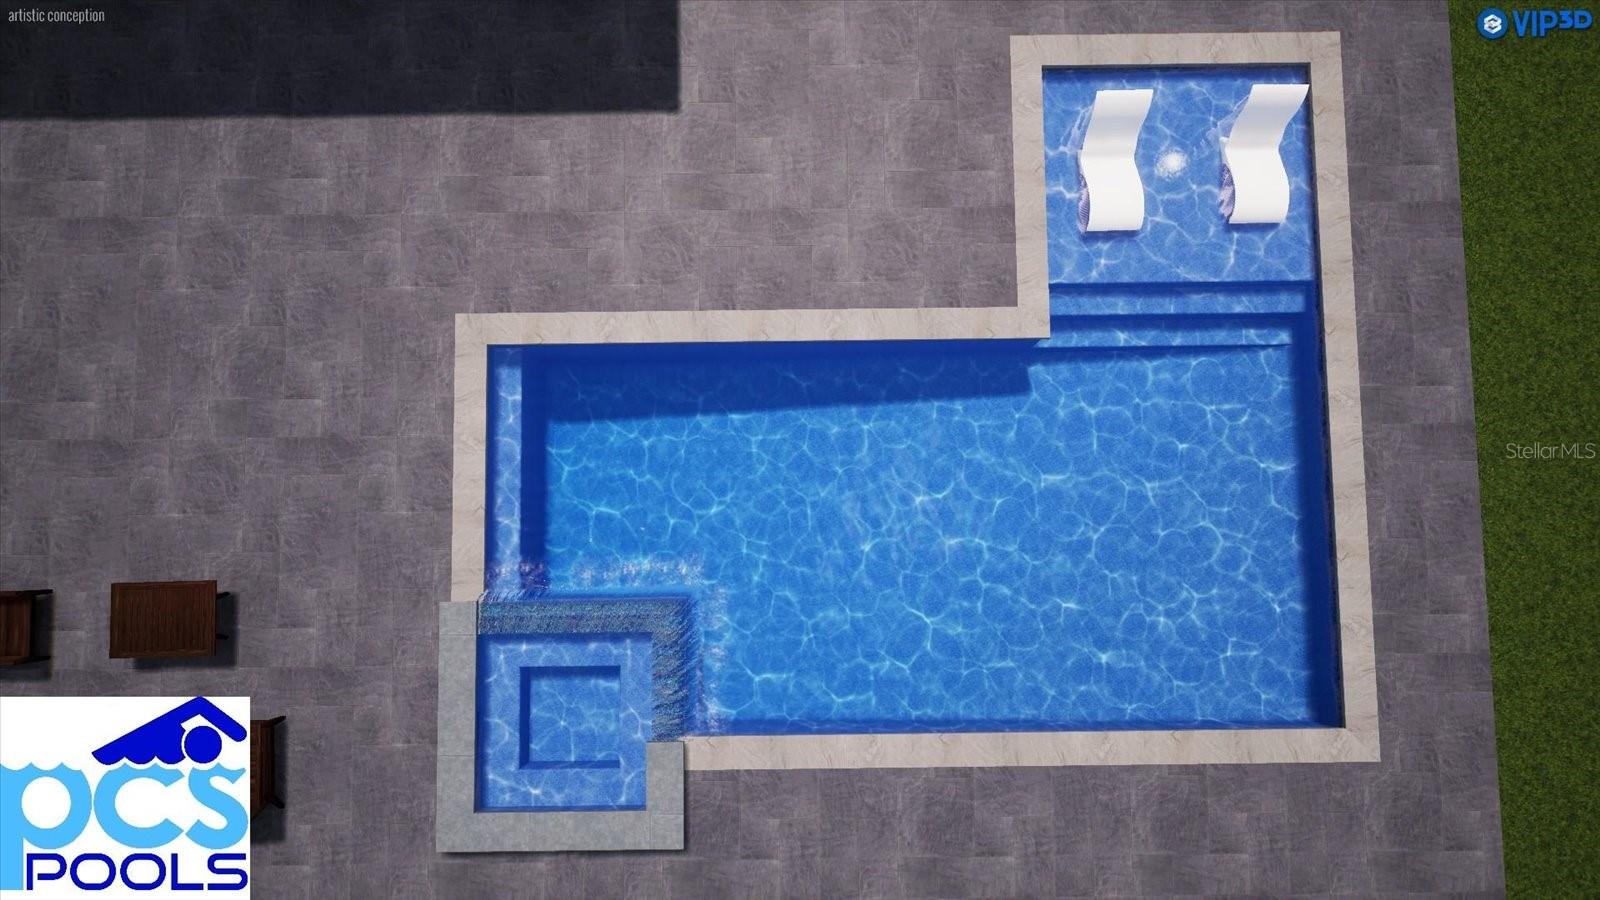 Example of Potential Pool Design